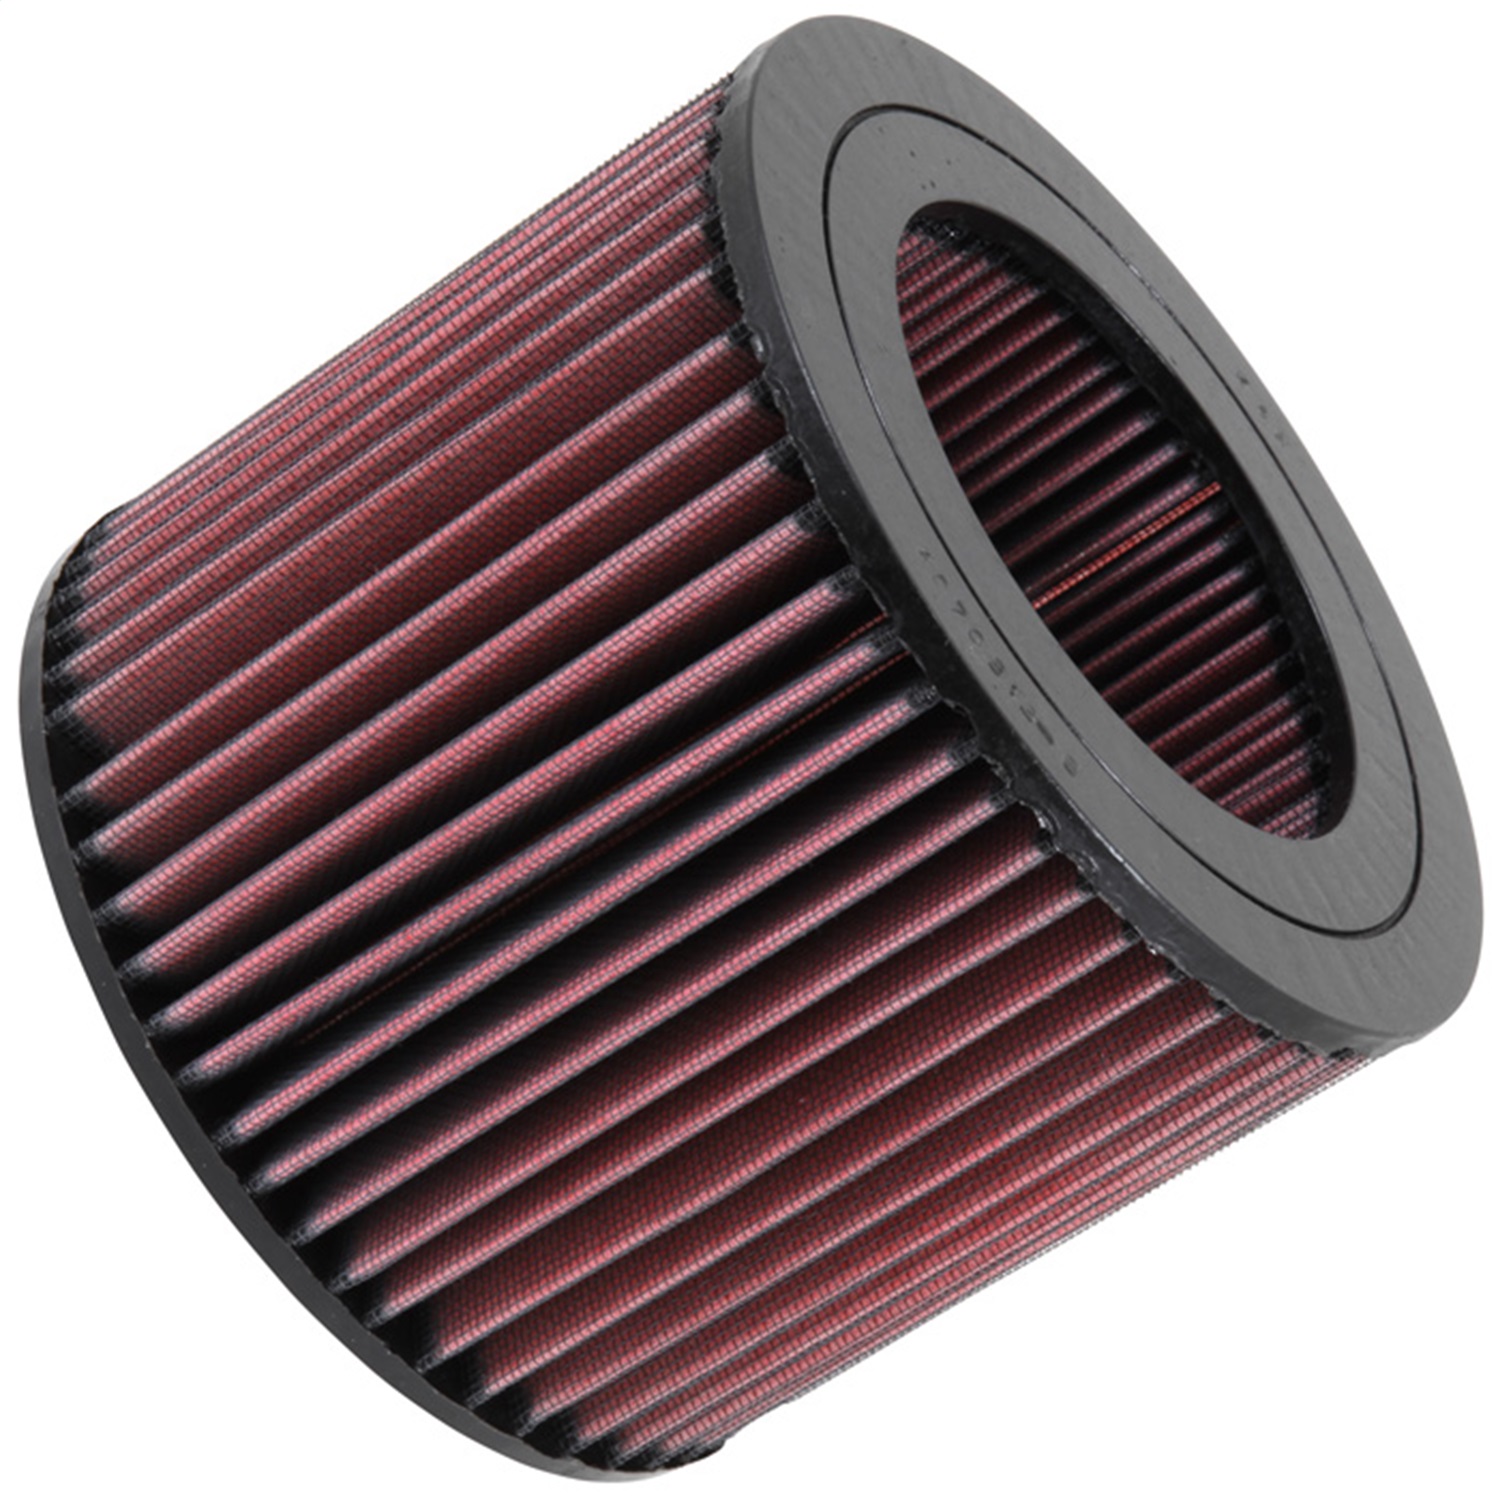 K&N Filters K&N Filters E-2443 Air Filter Fits 93-97 Land Cruiser LX450